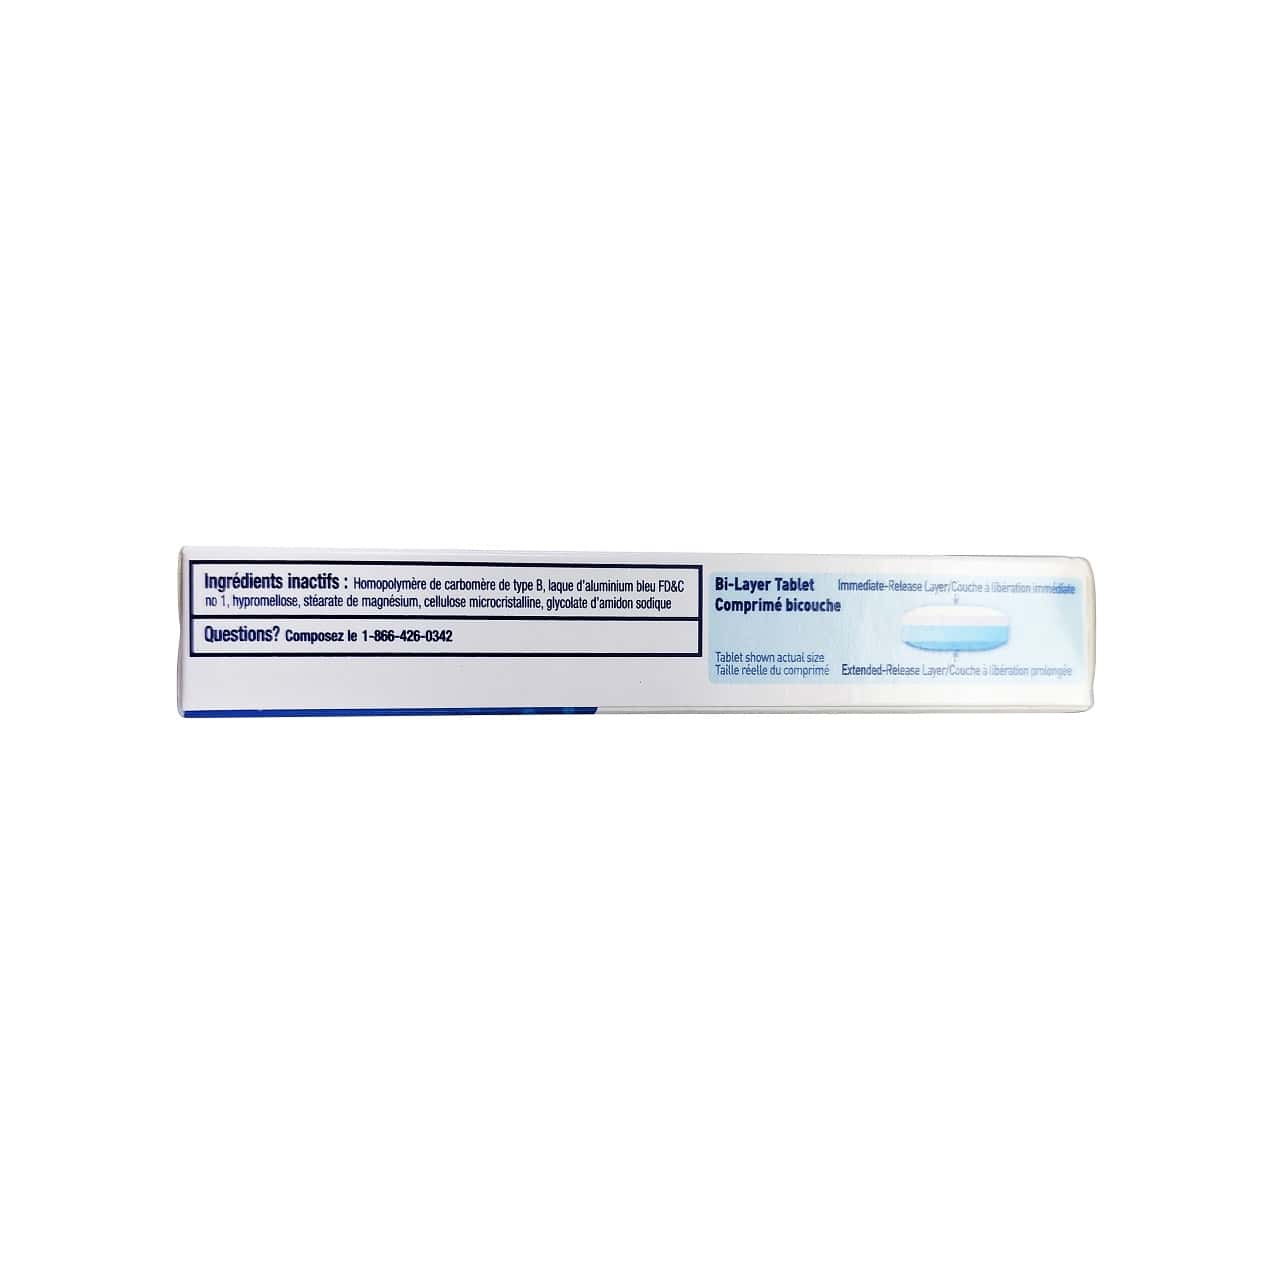 Ingredients for Mucinex Expectorant Tablets for Chest Congestion Guaifenesin 600mg (40 tablets)